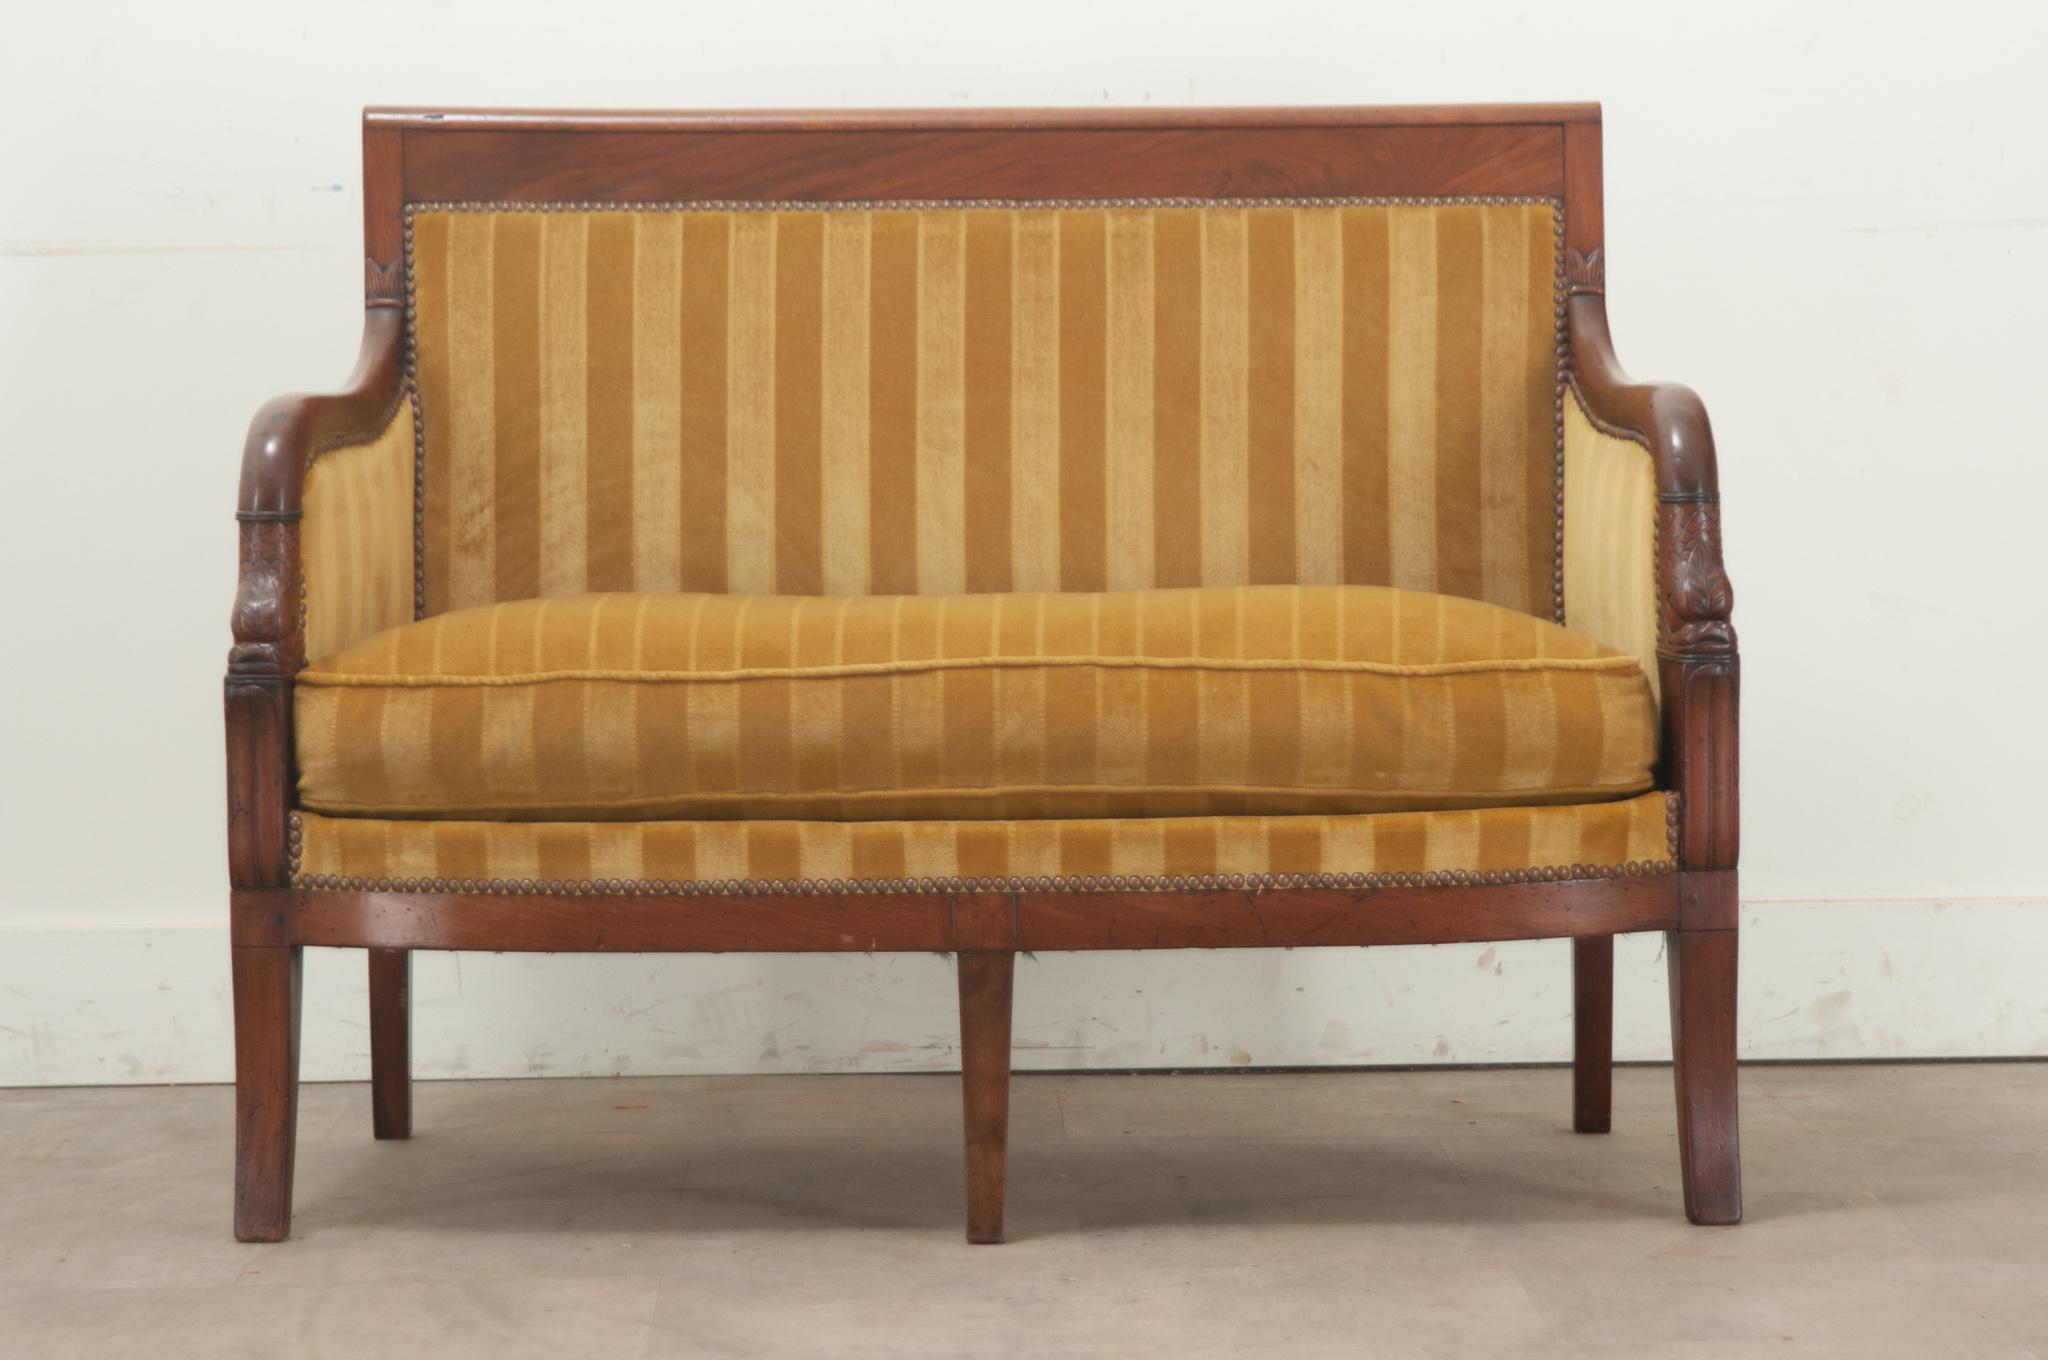 French Petite Restauration Upholstered Settee In Good Condition For Sale In Baton Rouge, LA